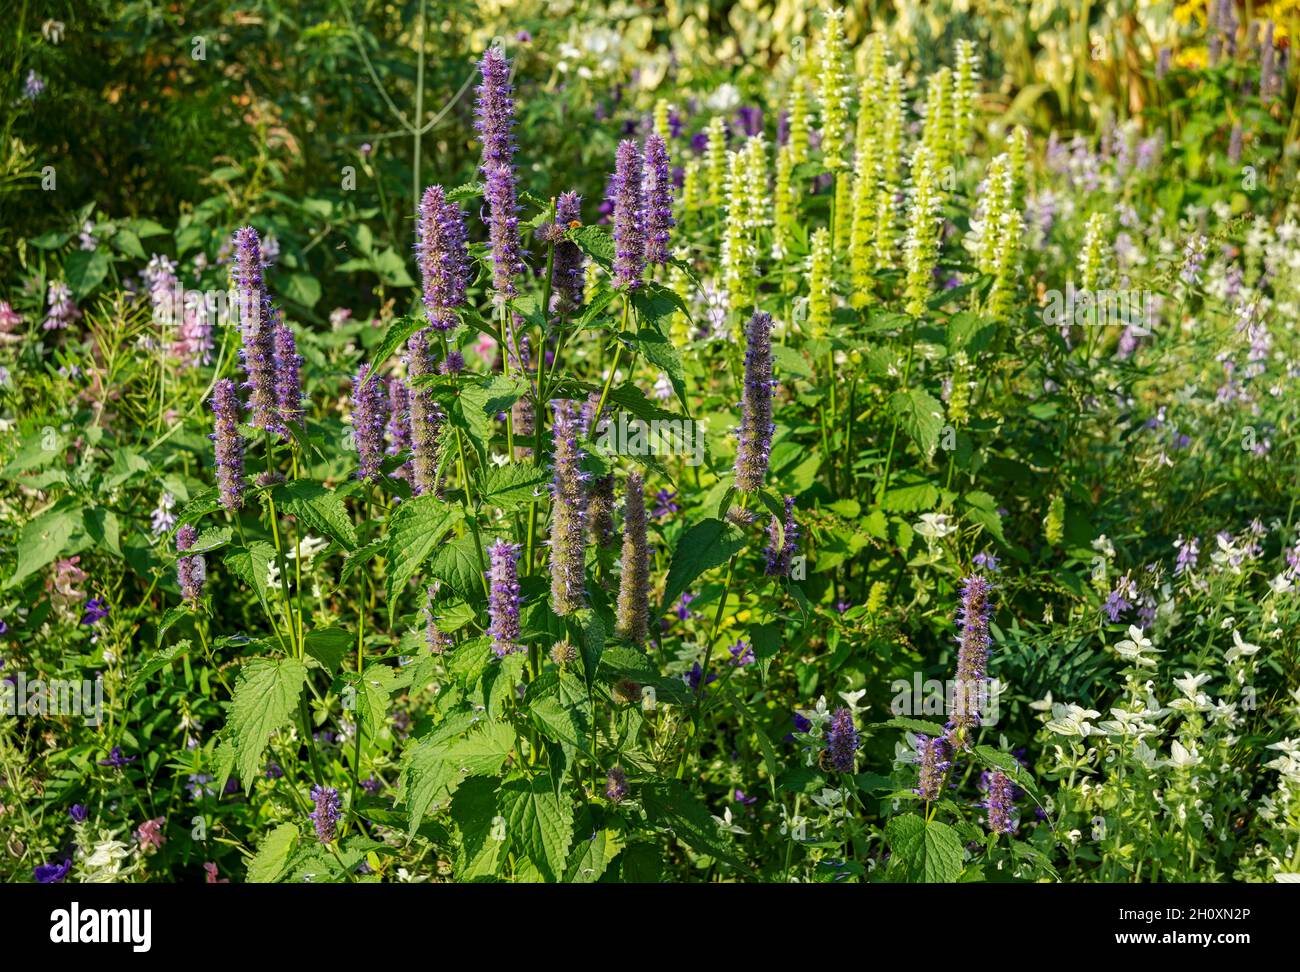 Purple and white giant hyssop agastache plants flowers in summer border England UK United Kingdom GB Great Britain Stock Photo